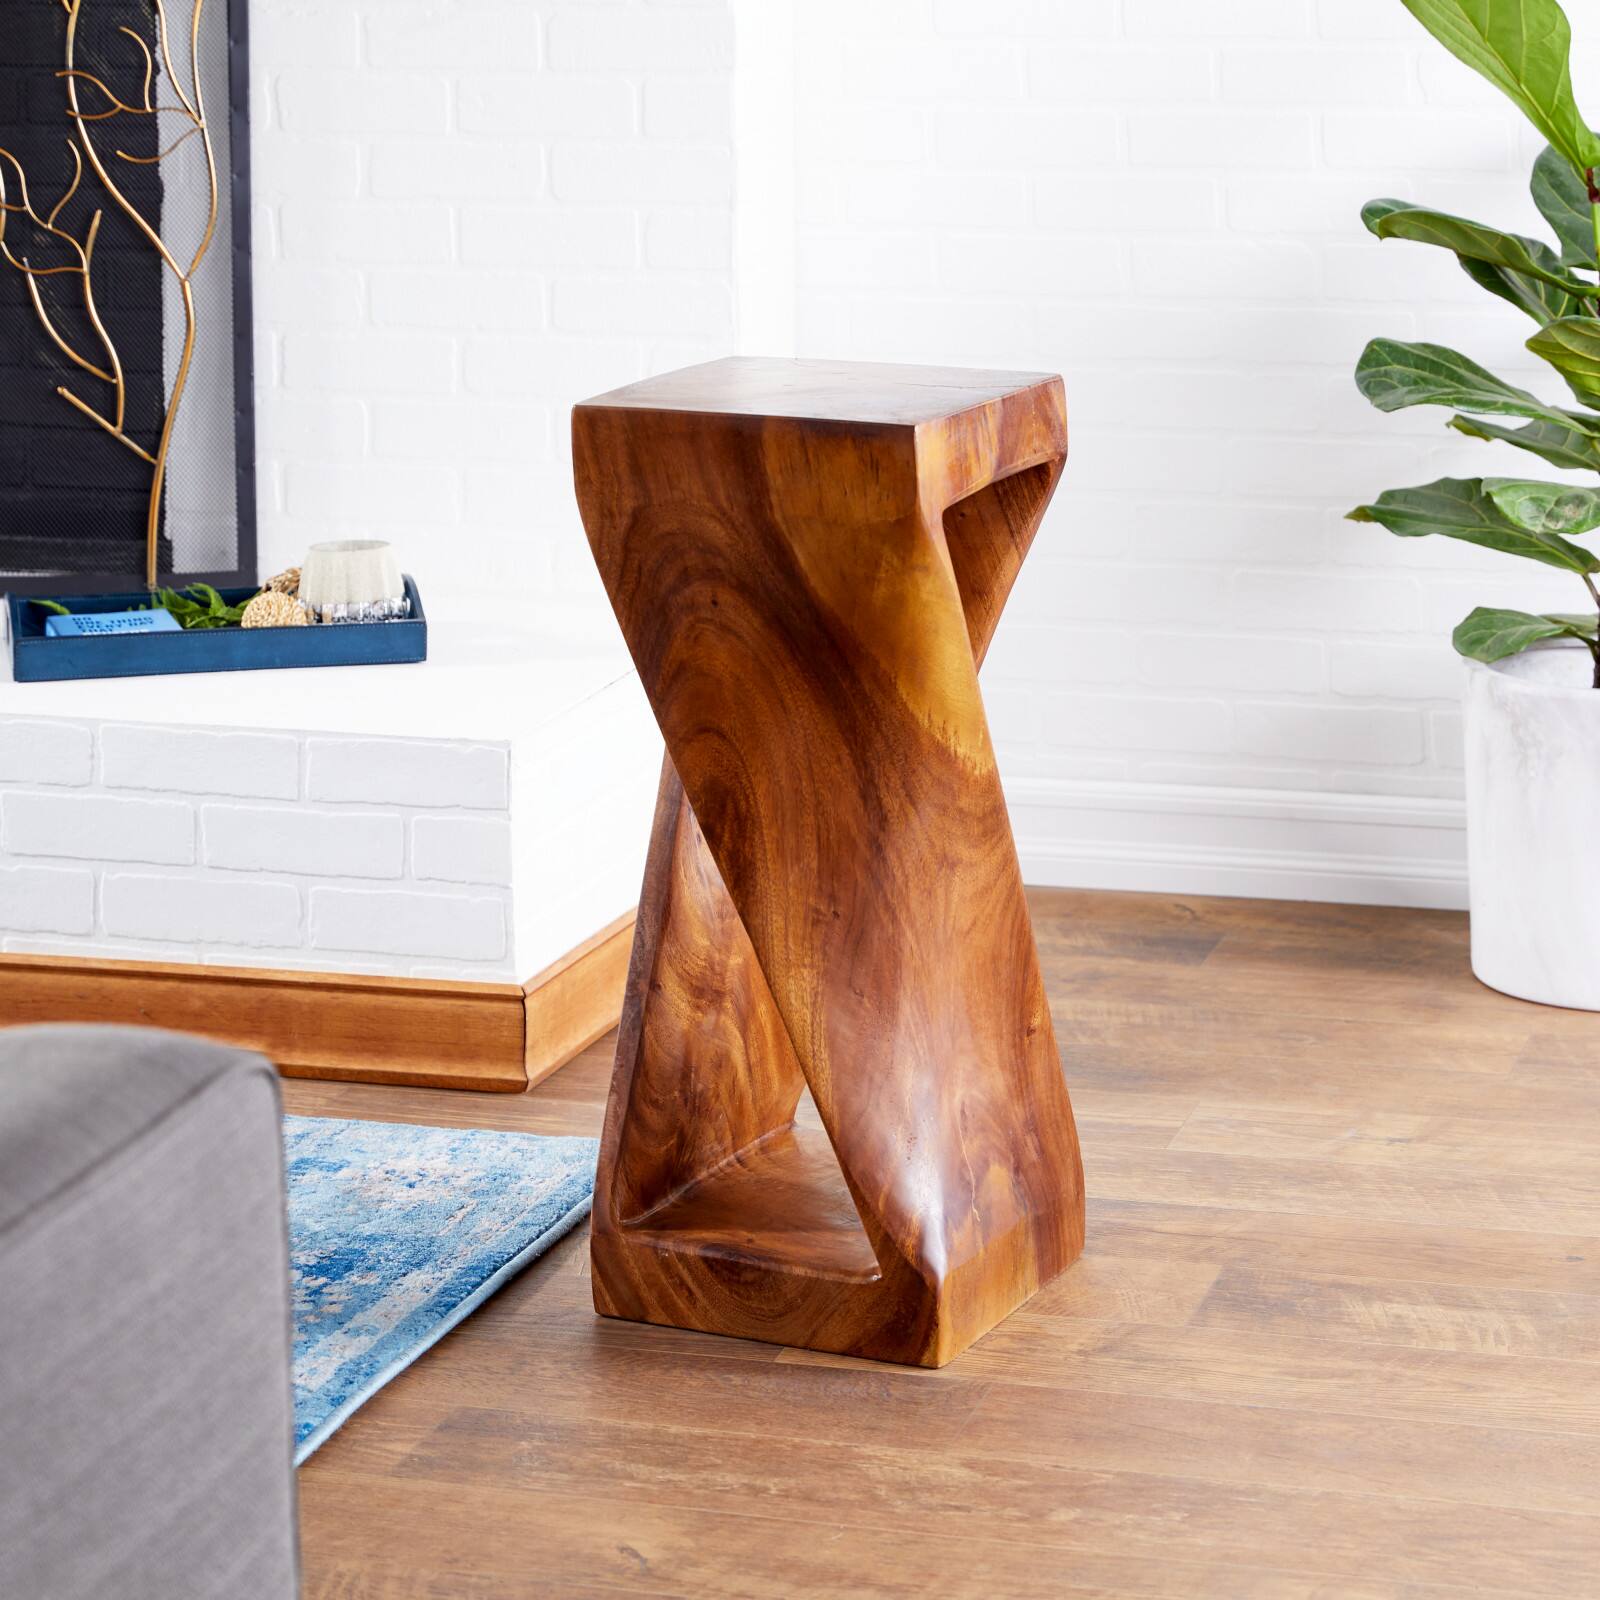 Brown Saur Wood Contemporary Accent Table